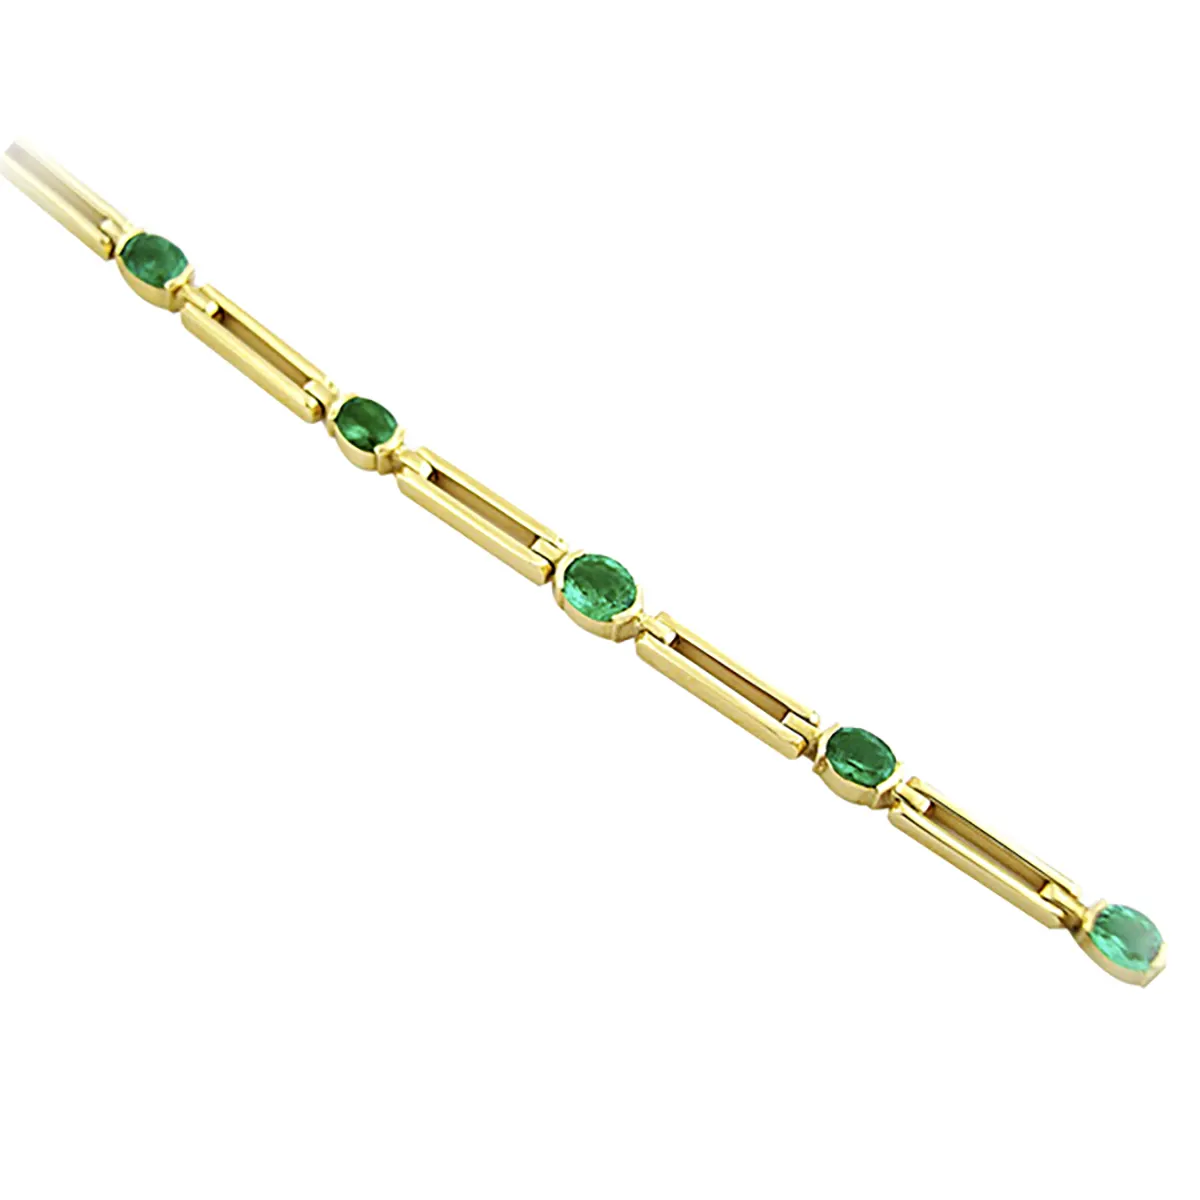 18K yellow gold emerald bracelet with 2.07 Ct. t.w. in 9 oval shape real natural Colombian emeralds in half bezel setting